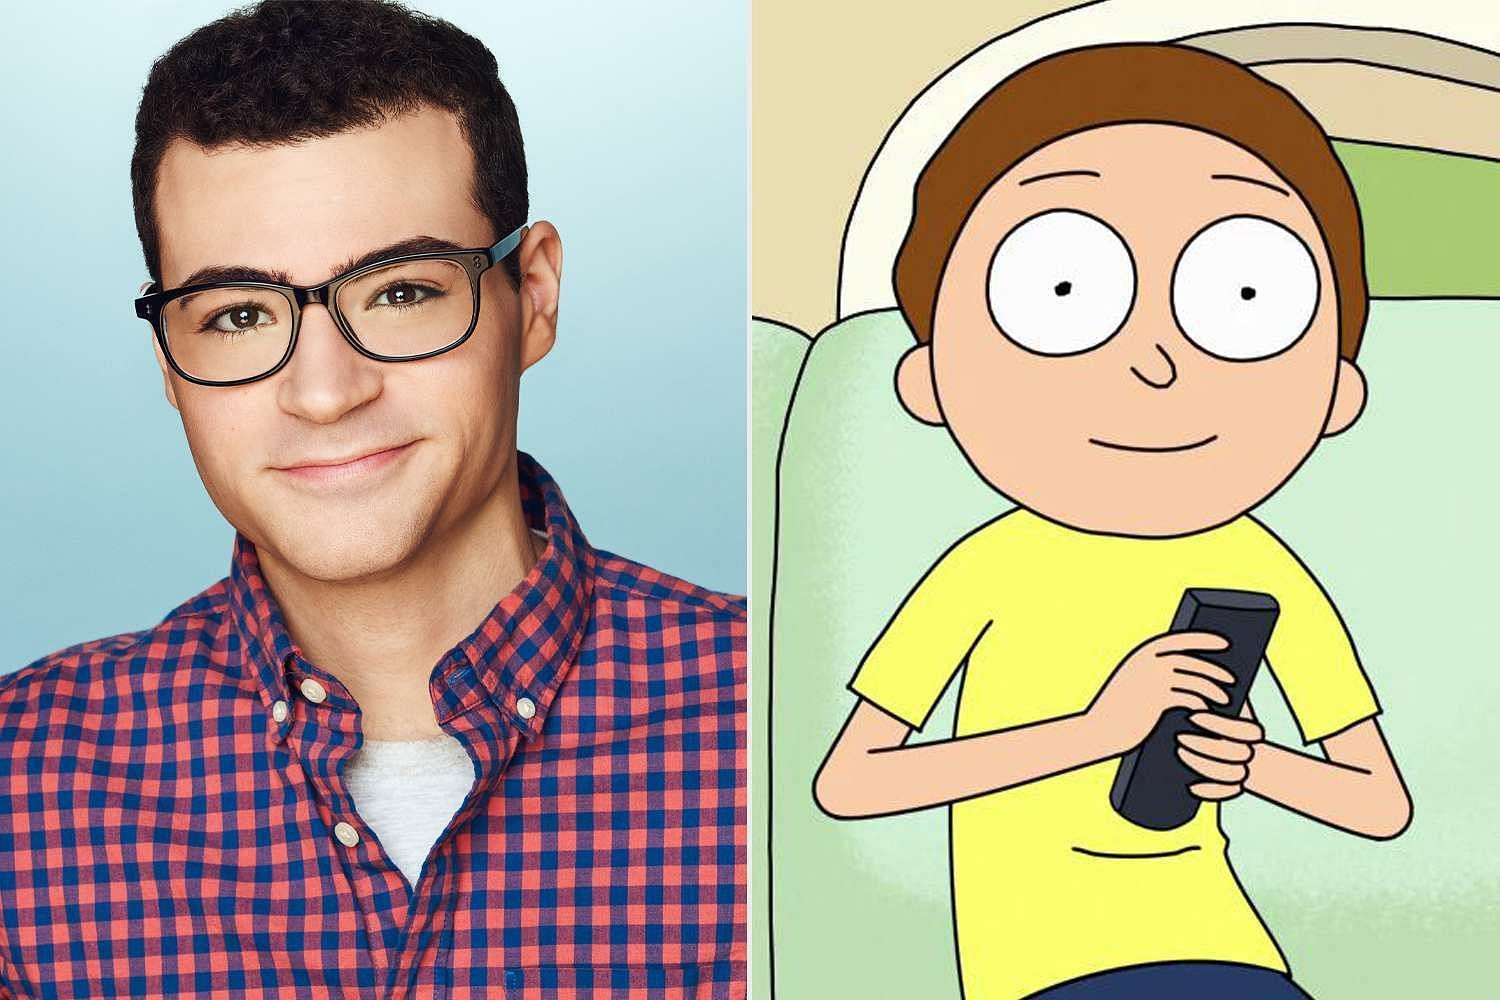 Harry Belden&rsquo;s Morty has a very different voice from Justin Roiland&rsquo;s Morty. (Image via Sportskeeda)